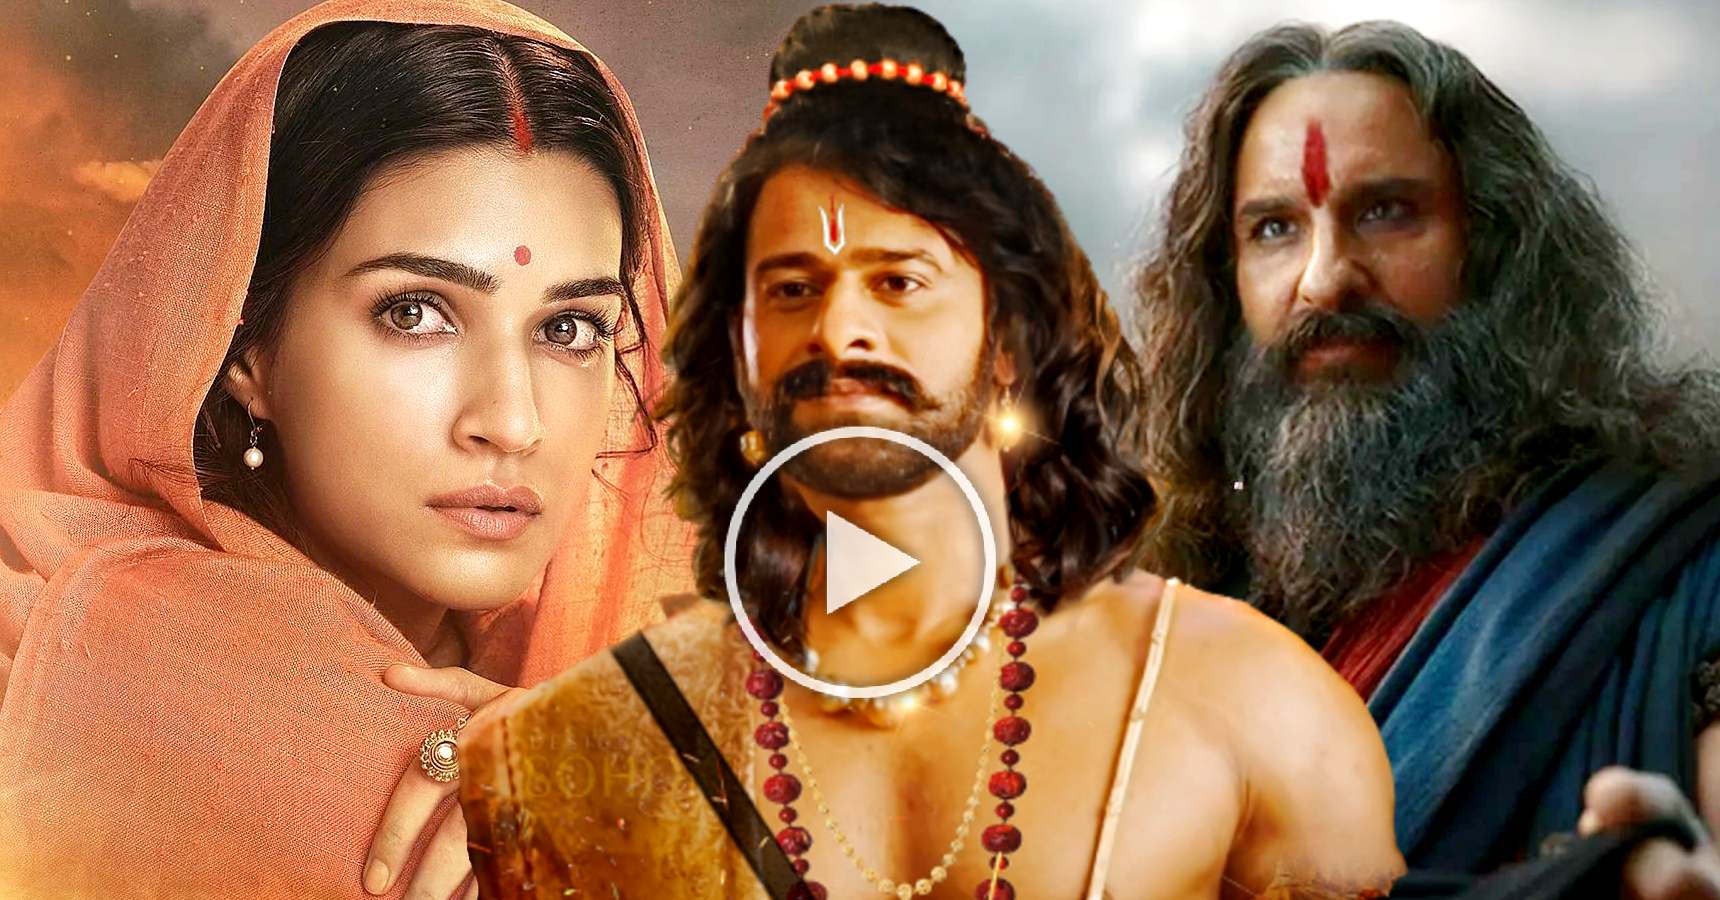 Adipurush trailer gets 51 million views in one day, this is how netizens reacted